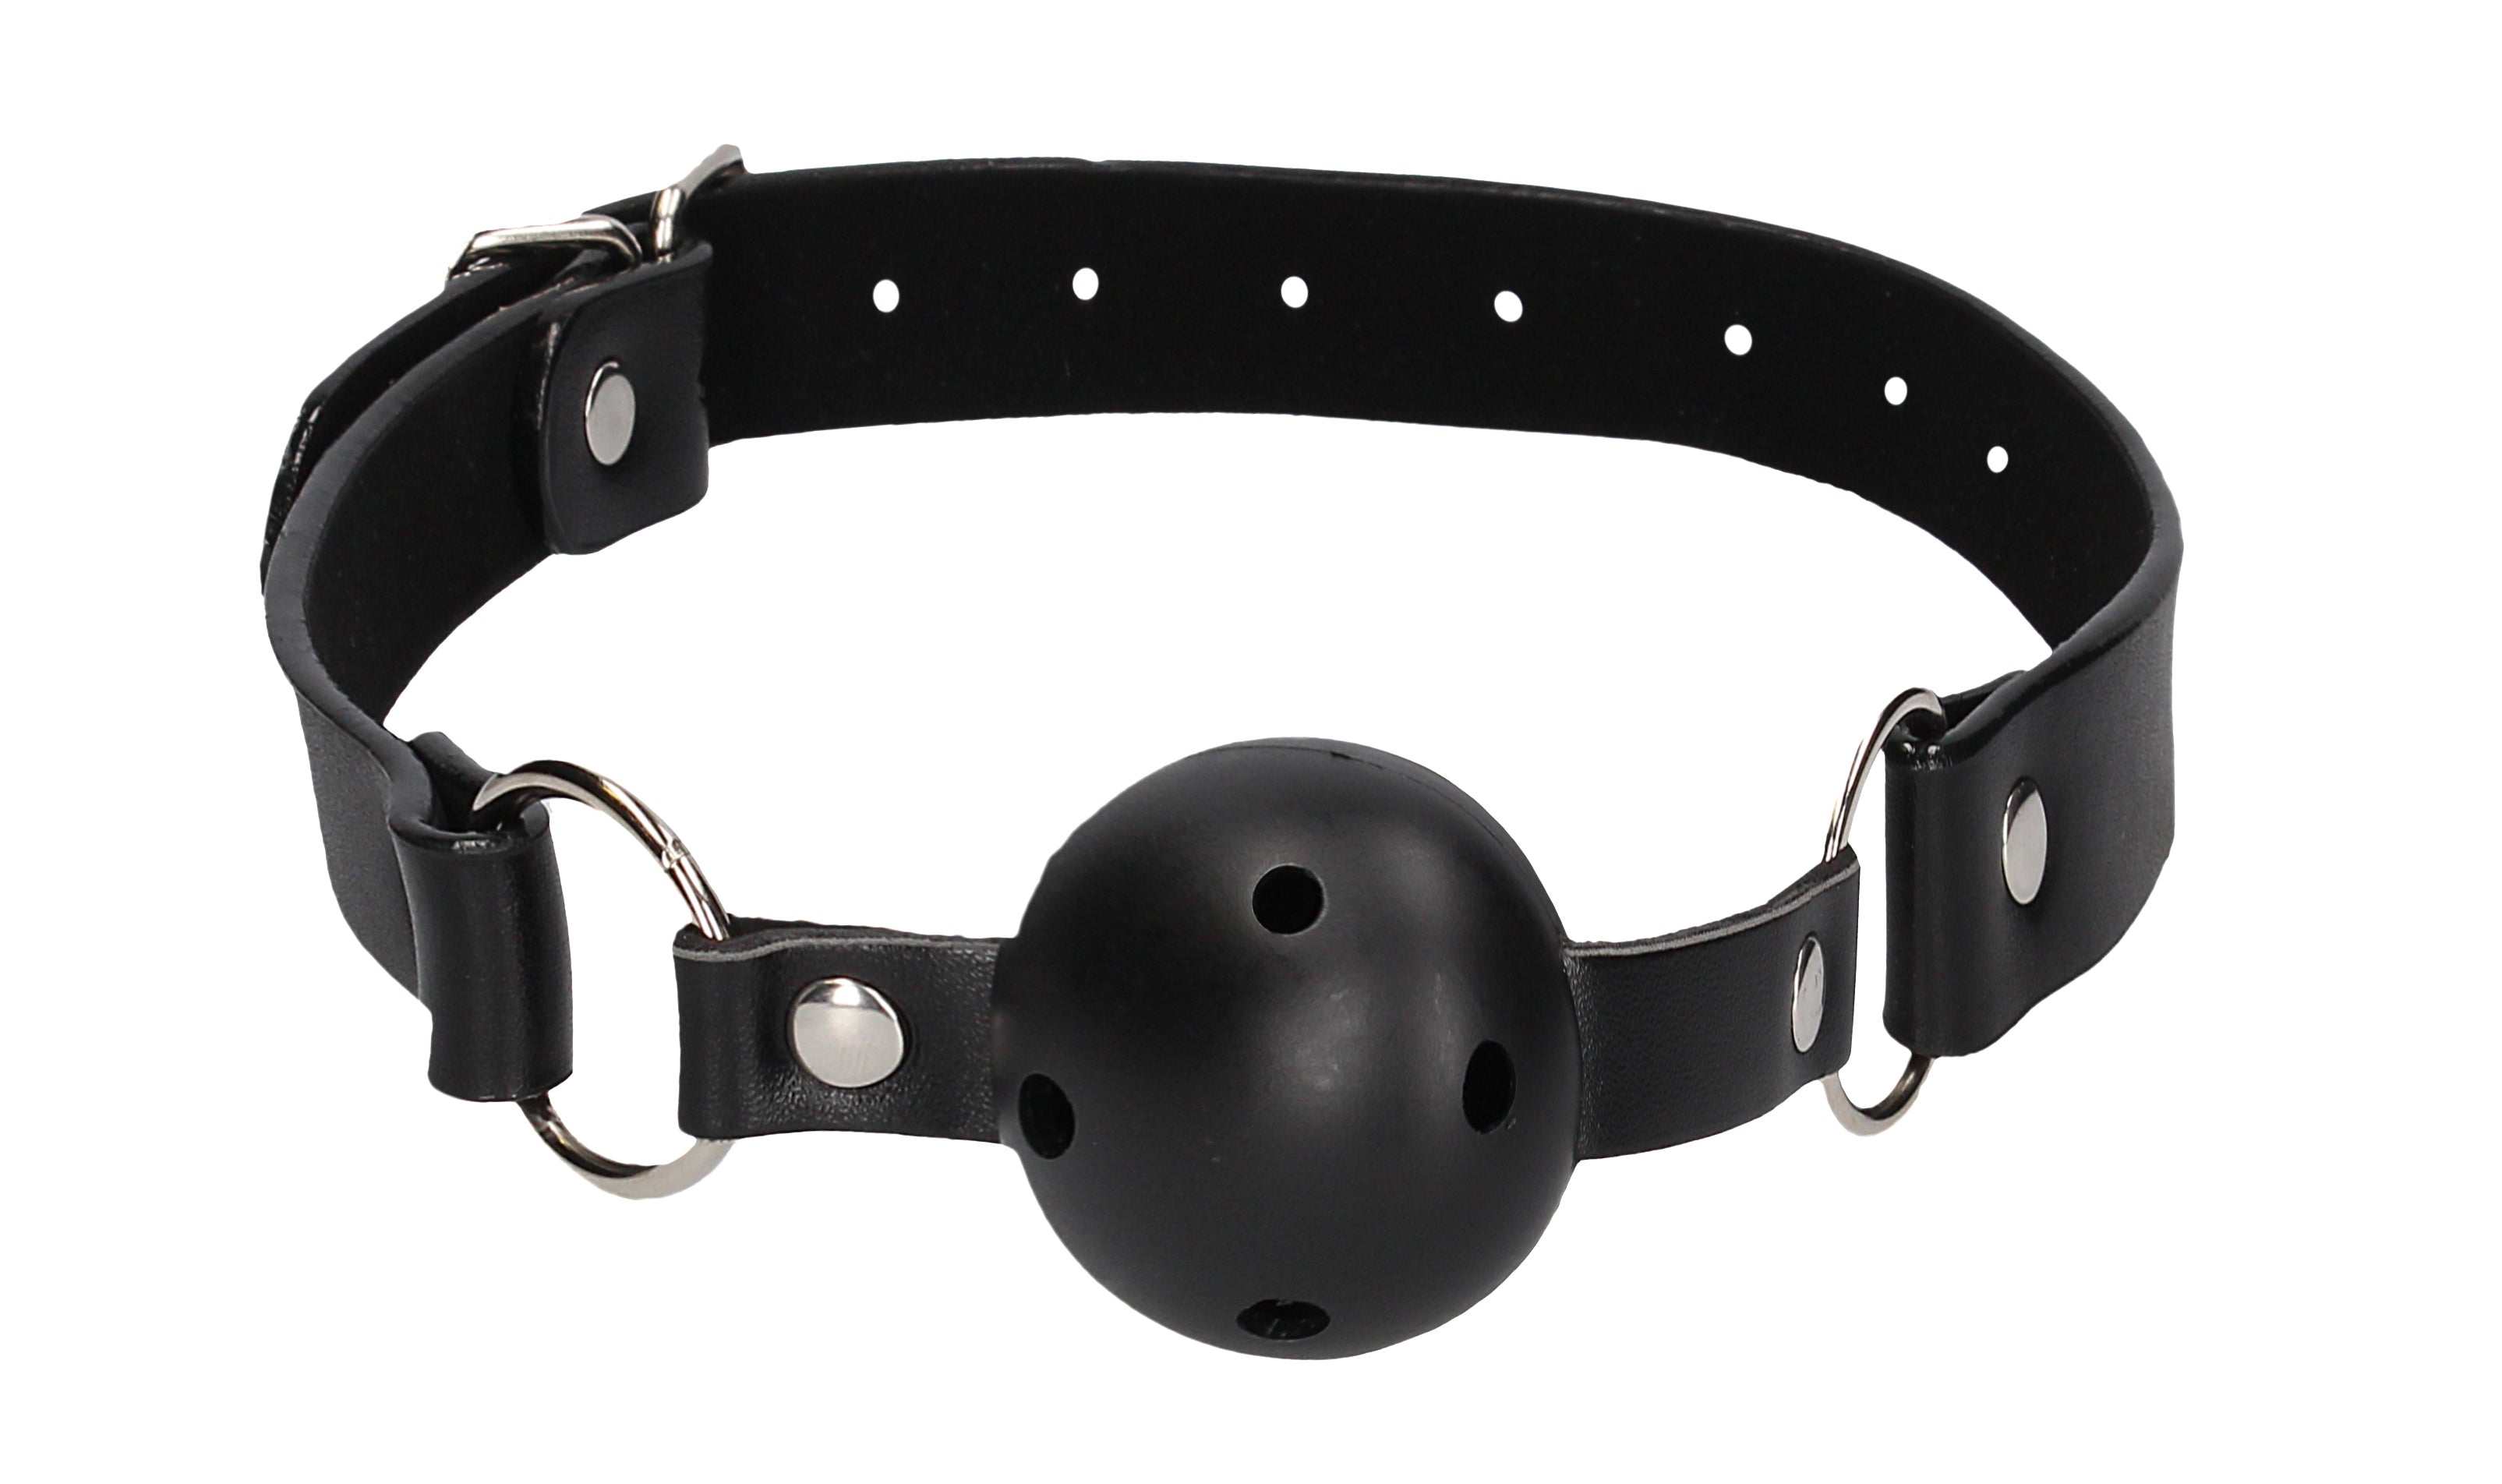 Breathable Ball Gag With Nipple Clamps: A Sensually Adventurous Experience